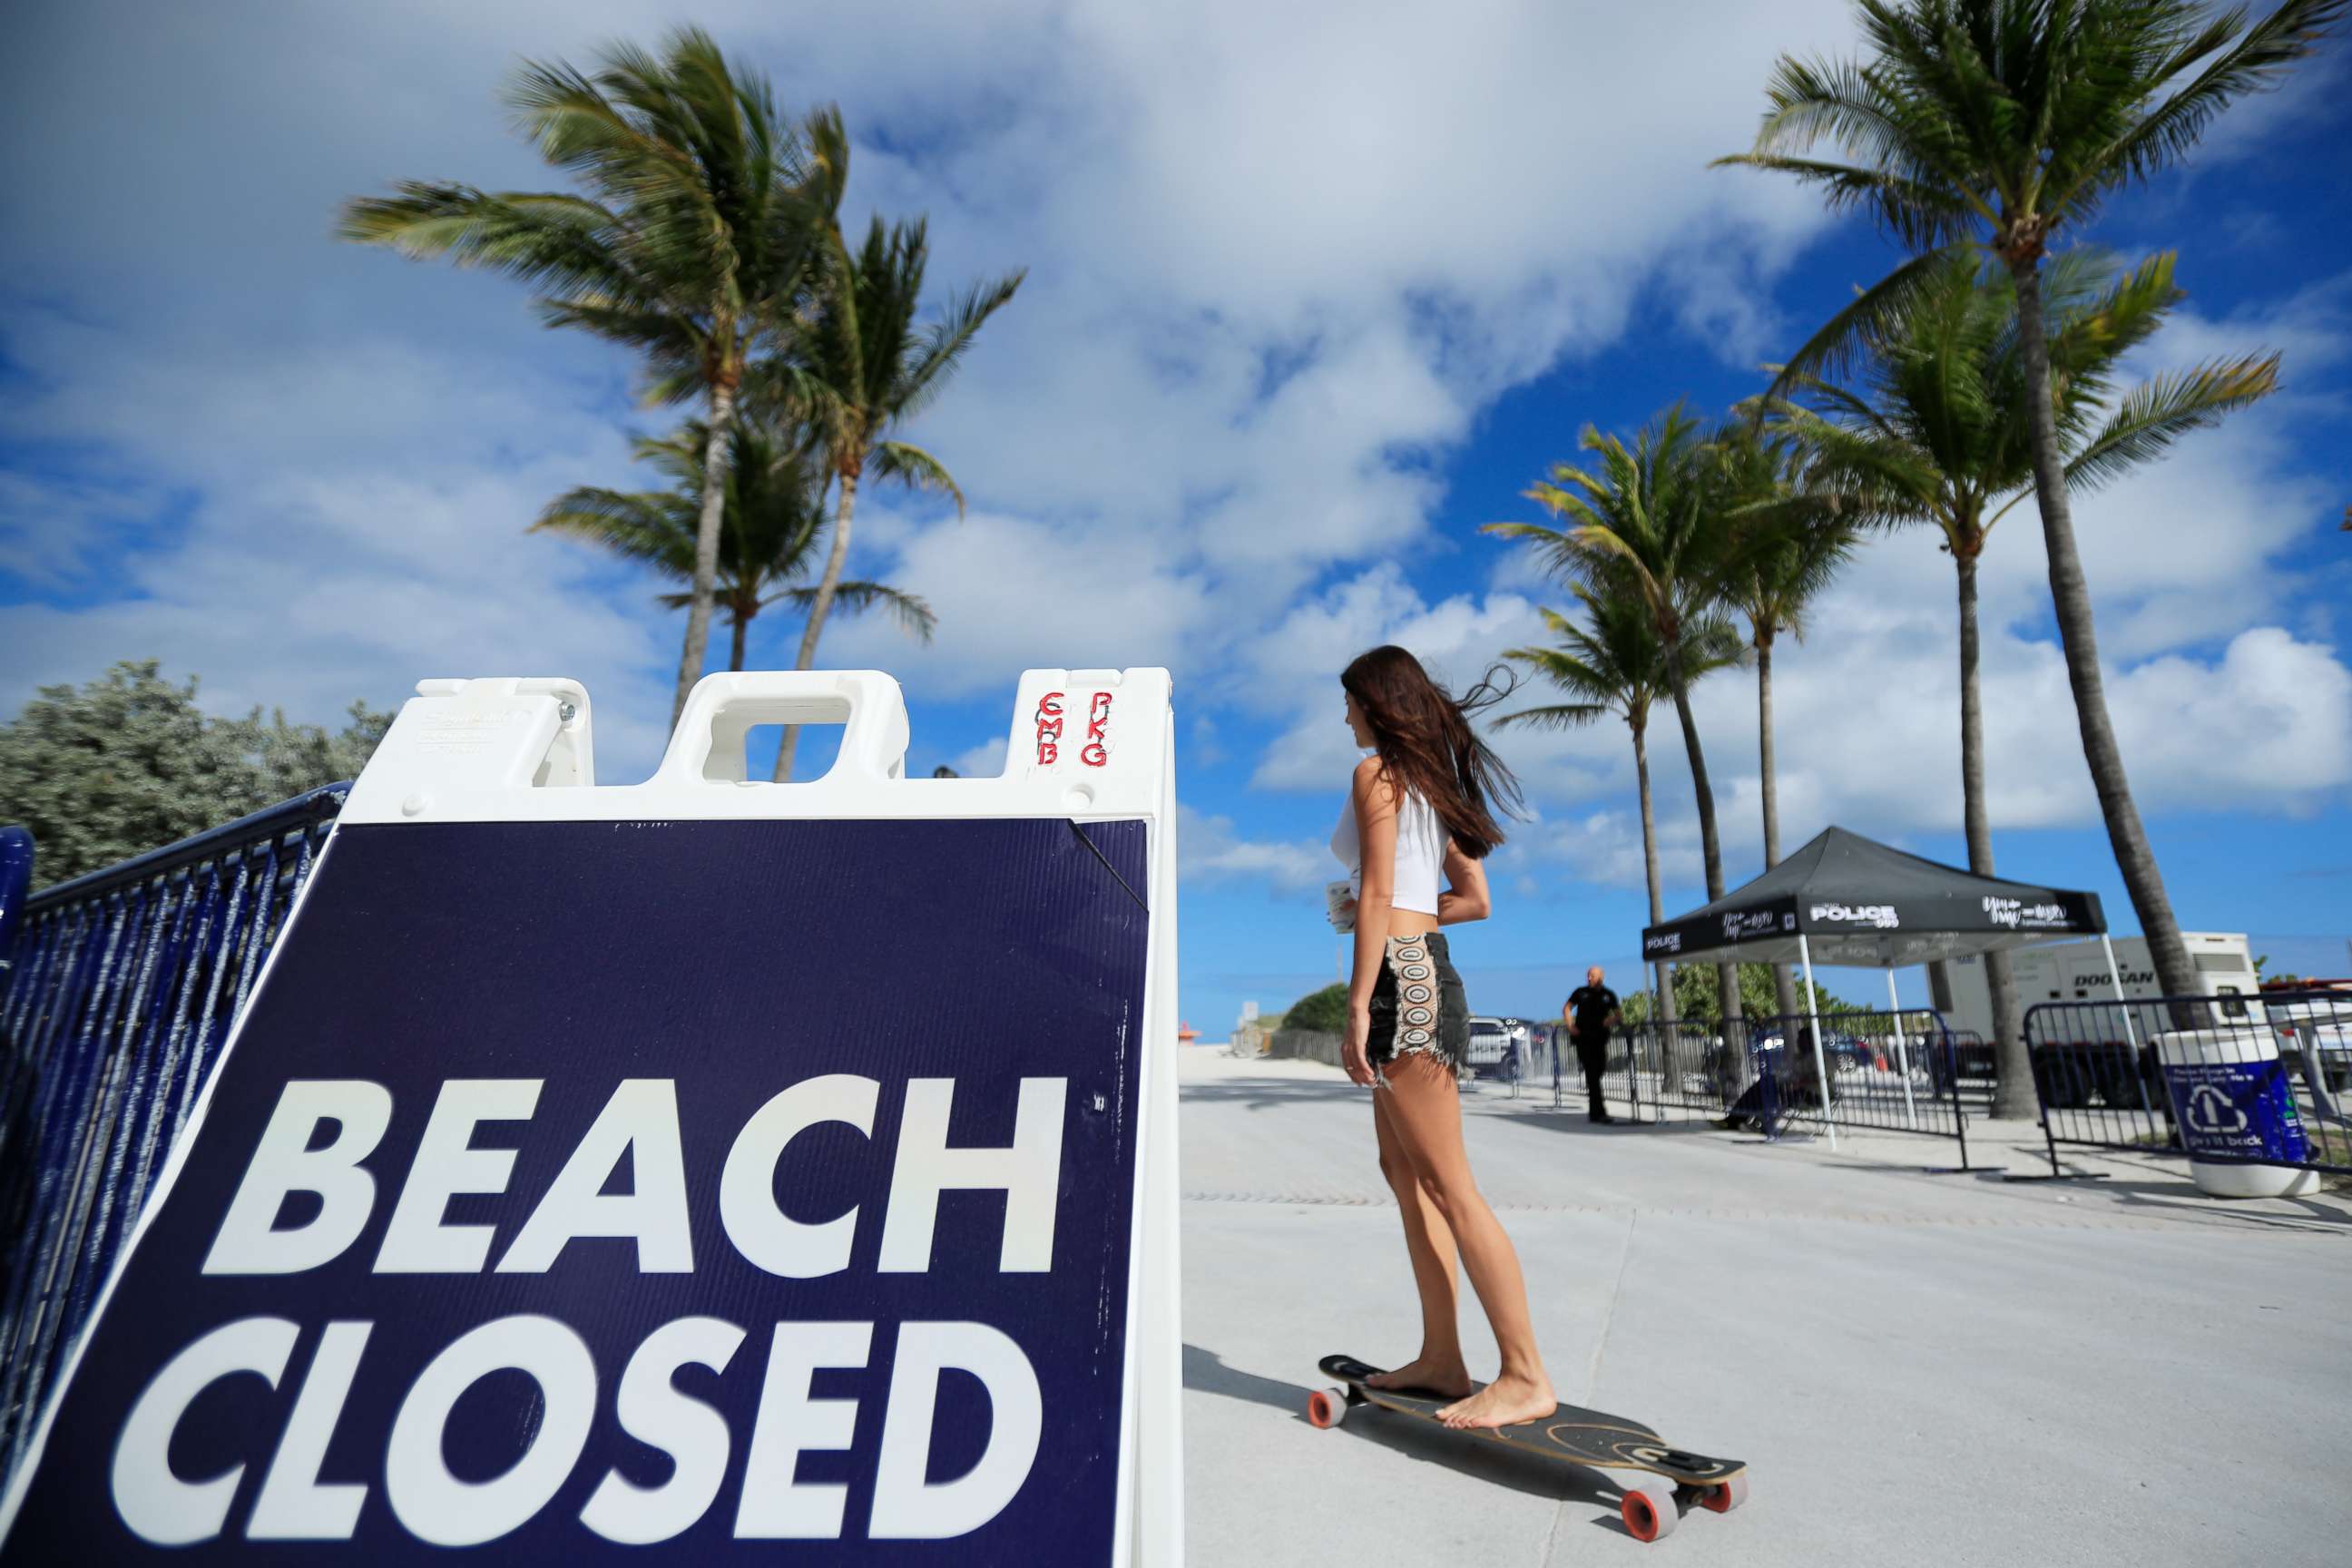 PHOTO: A skateboarder passes a "Beach Closed" sign on the boardwalk on March 22, 2020 in Miami Beach, Florida. The city of Miami Beach has closed all parks and beaches due to COVID-19, however the boardwalk is open for people to exercise.